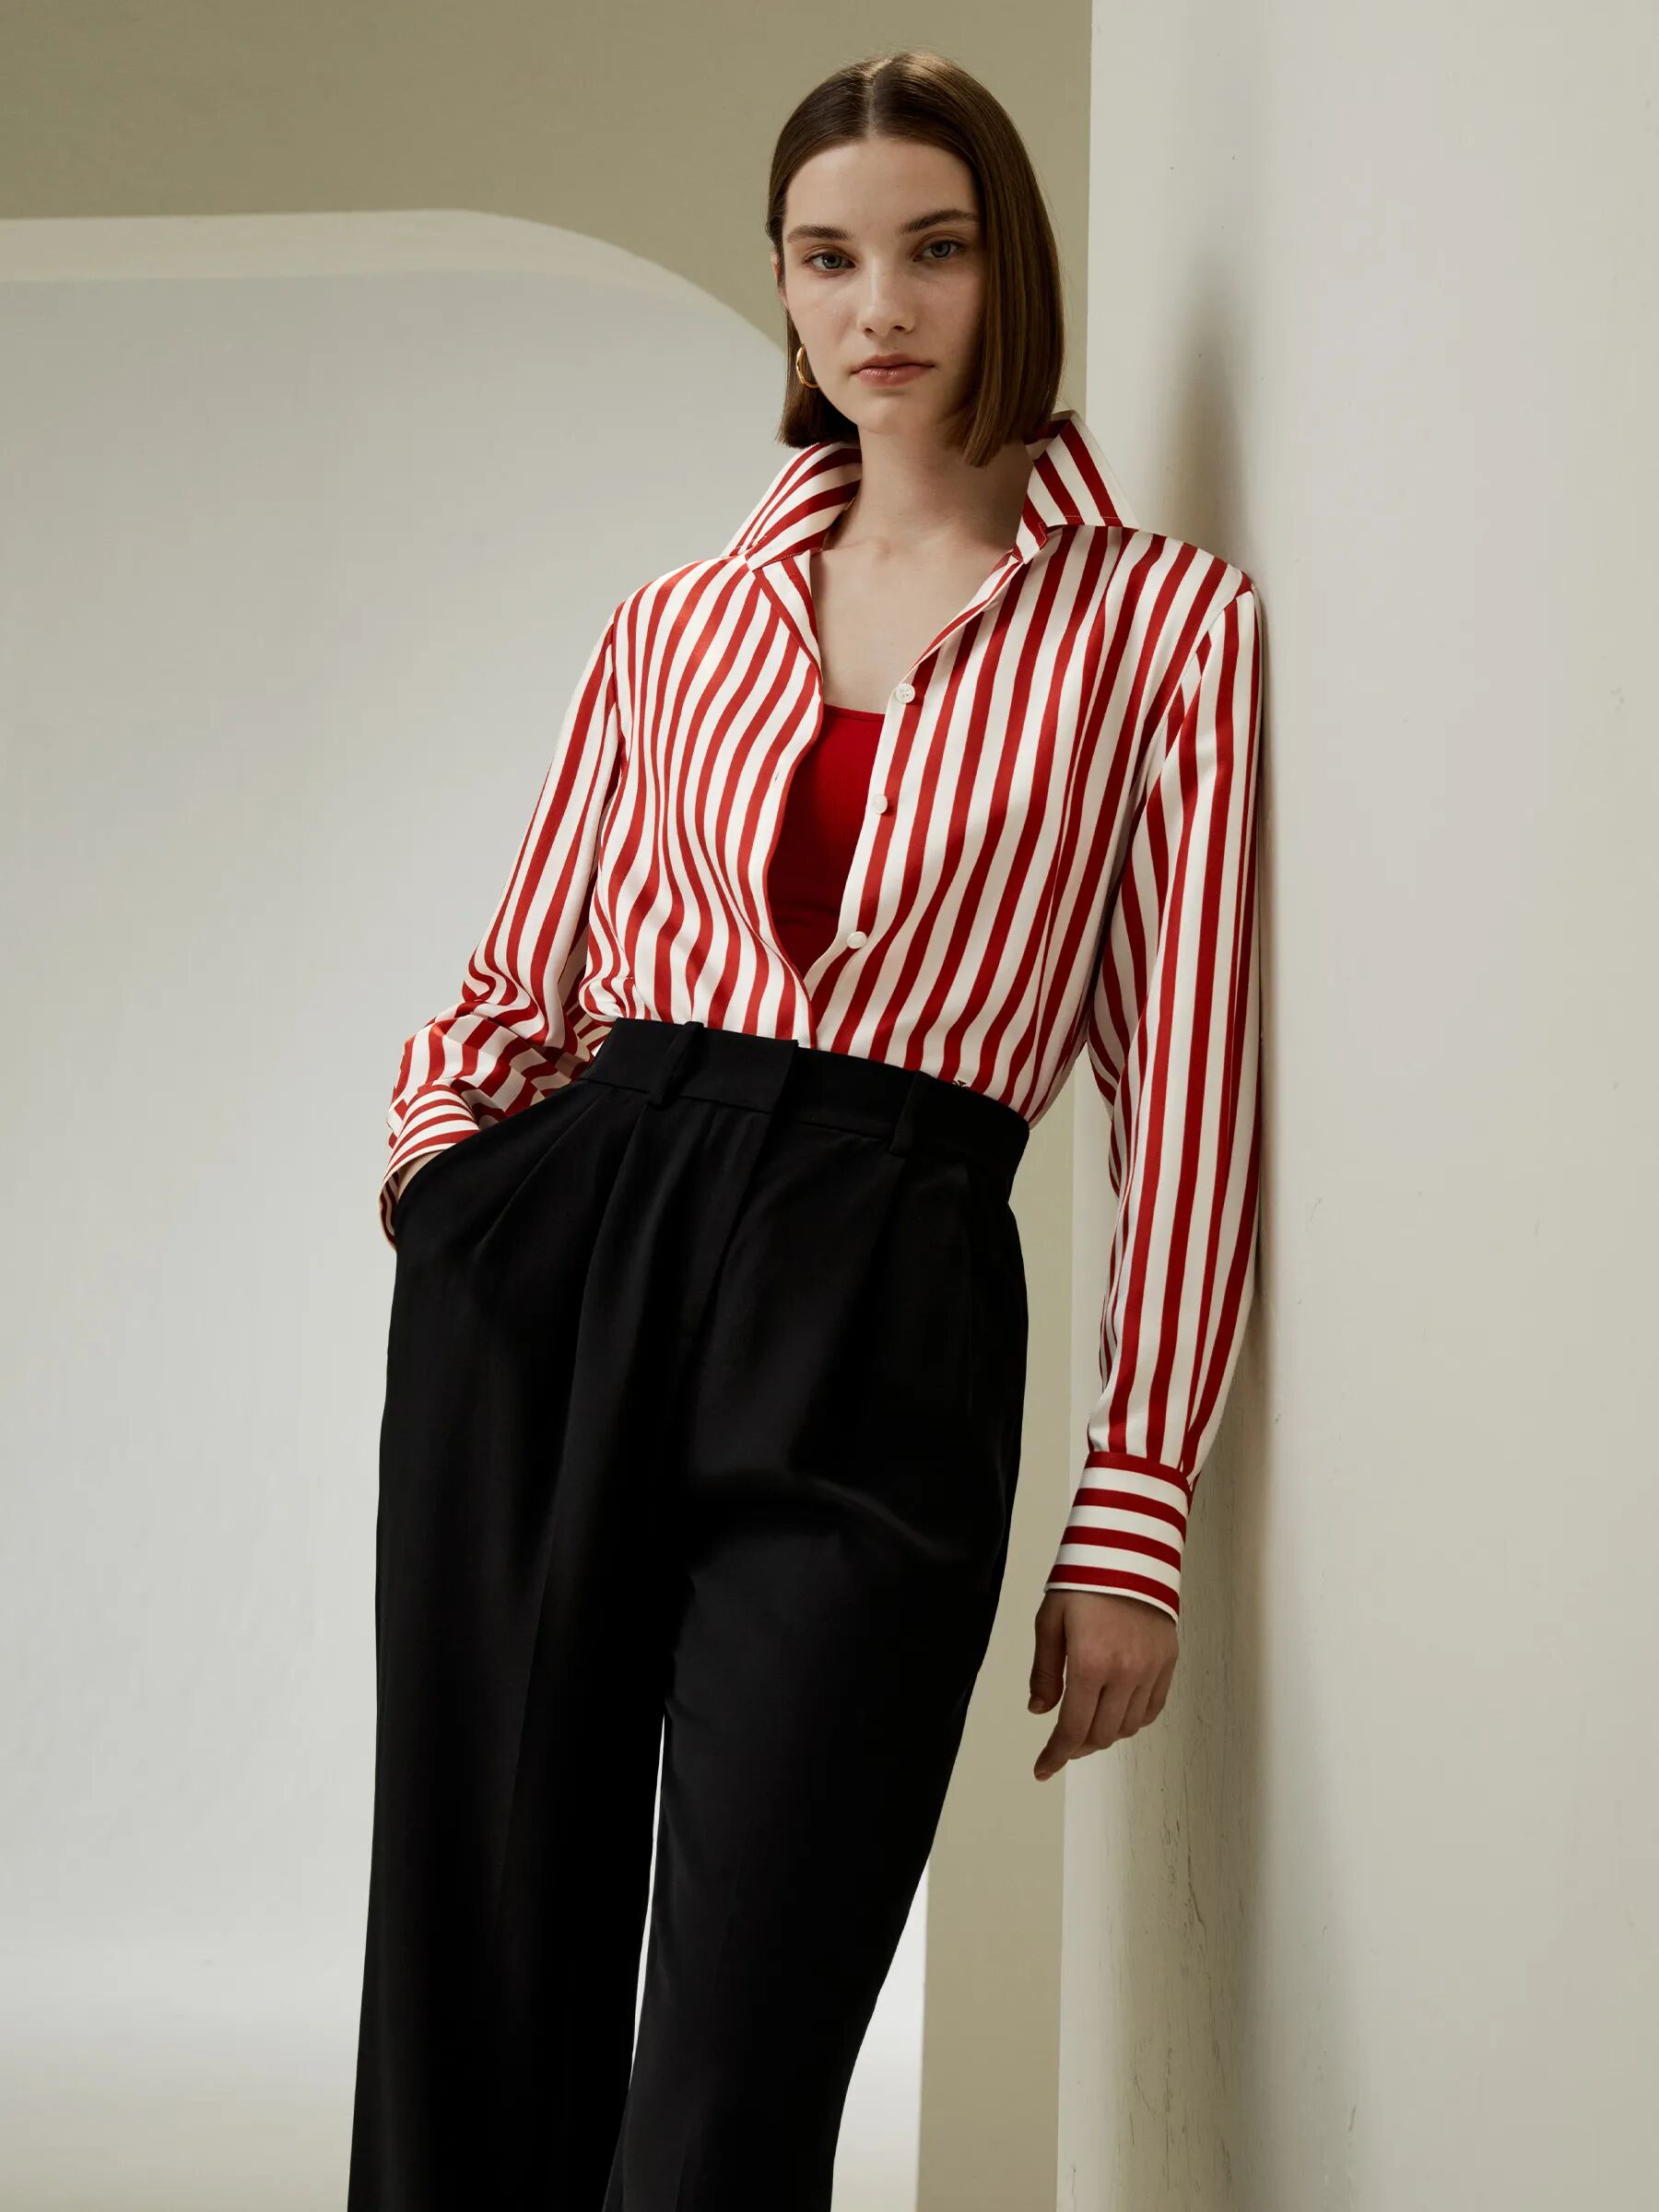 LILYSILK Business Red White Striped Shirt   Silk   Ladies Female Shirts Pinstripes Mulberry Wardrobe Must-Have Contrast S